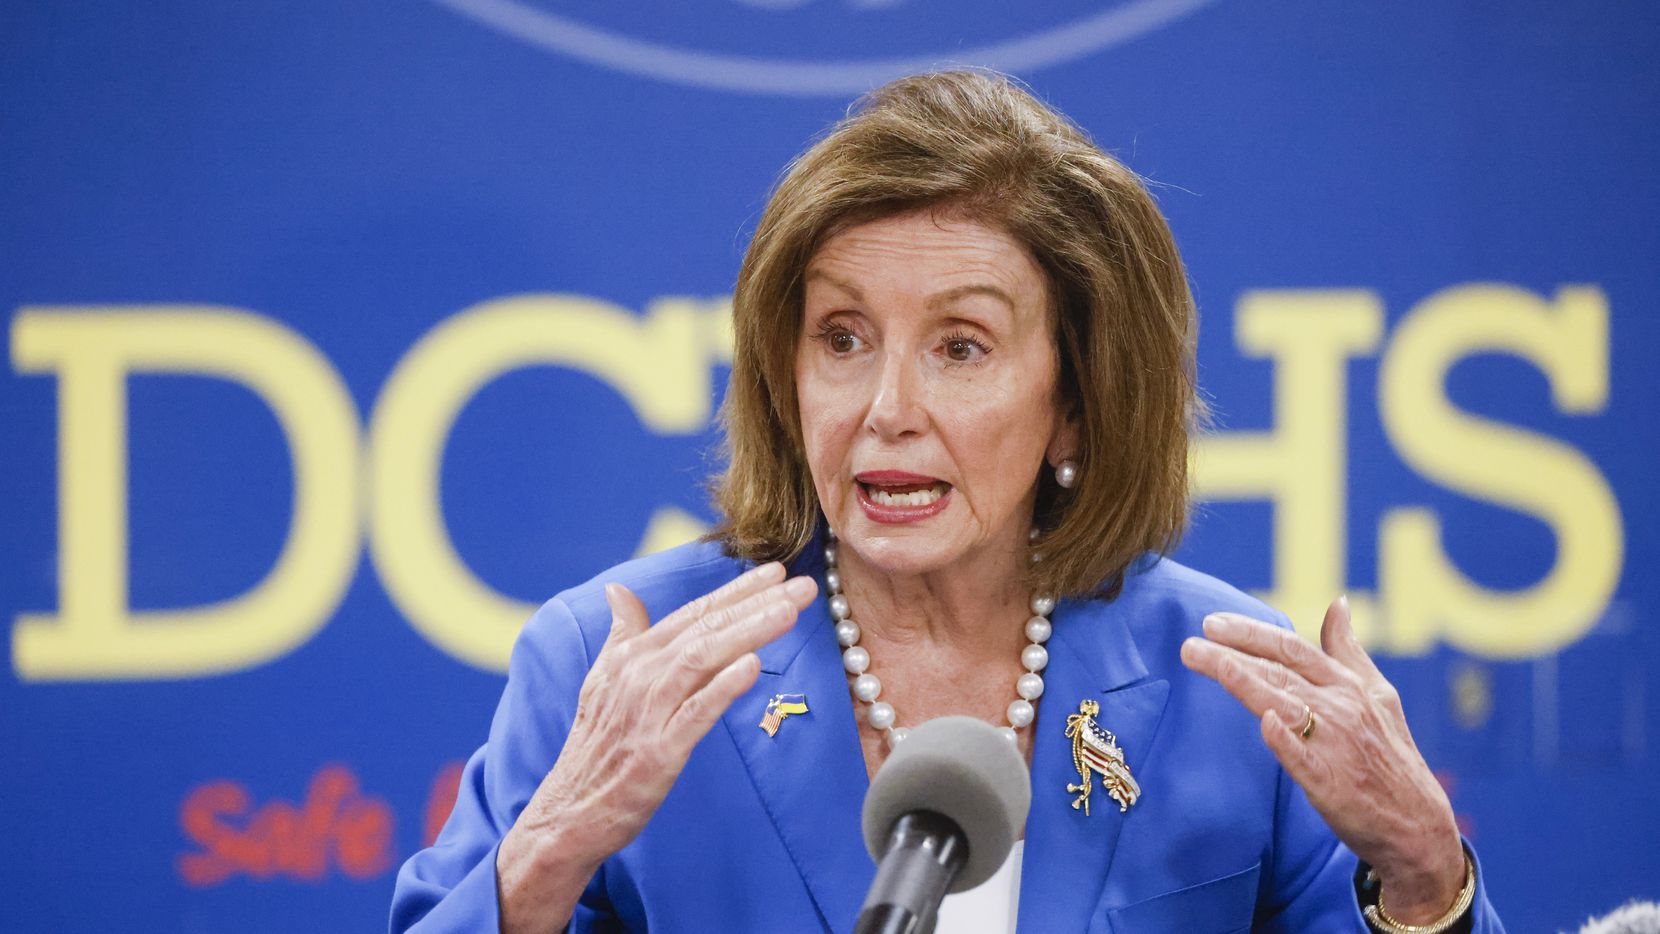 Pelosi visits Dallas for a healthcare roundtable